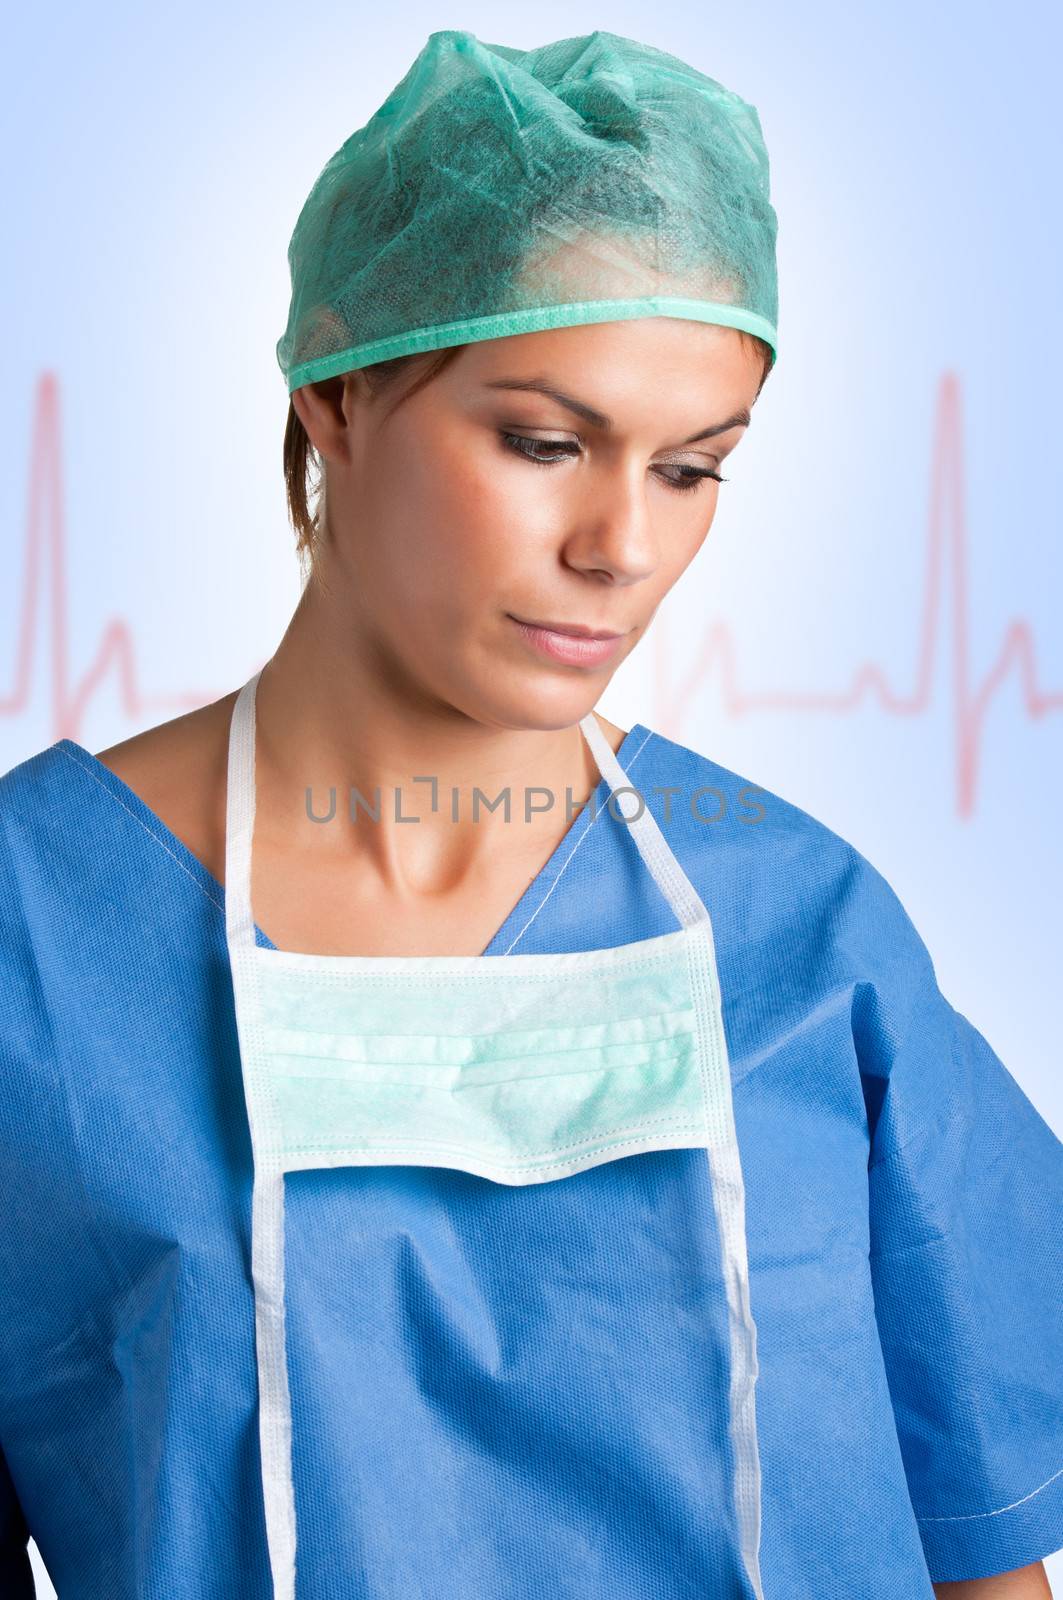 Sad Female Surgeon in scrubs, looking down, with an EKG graph behing her